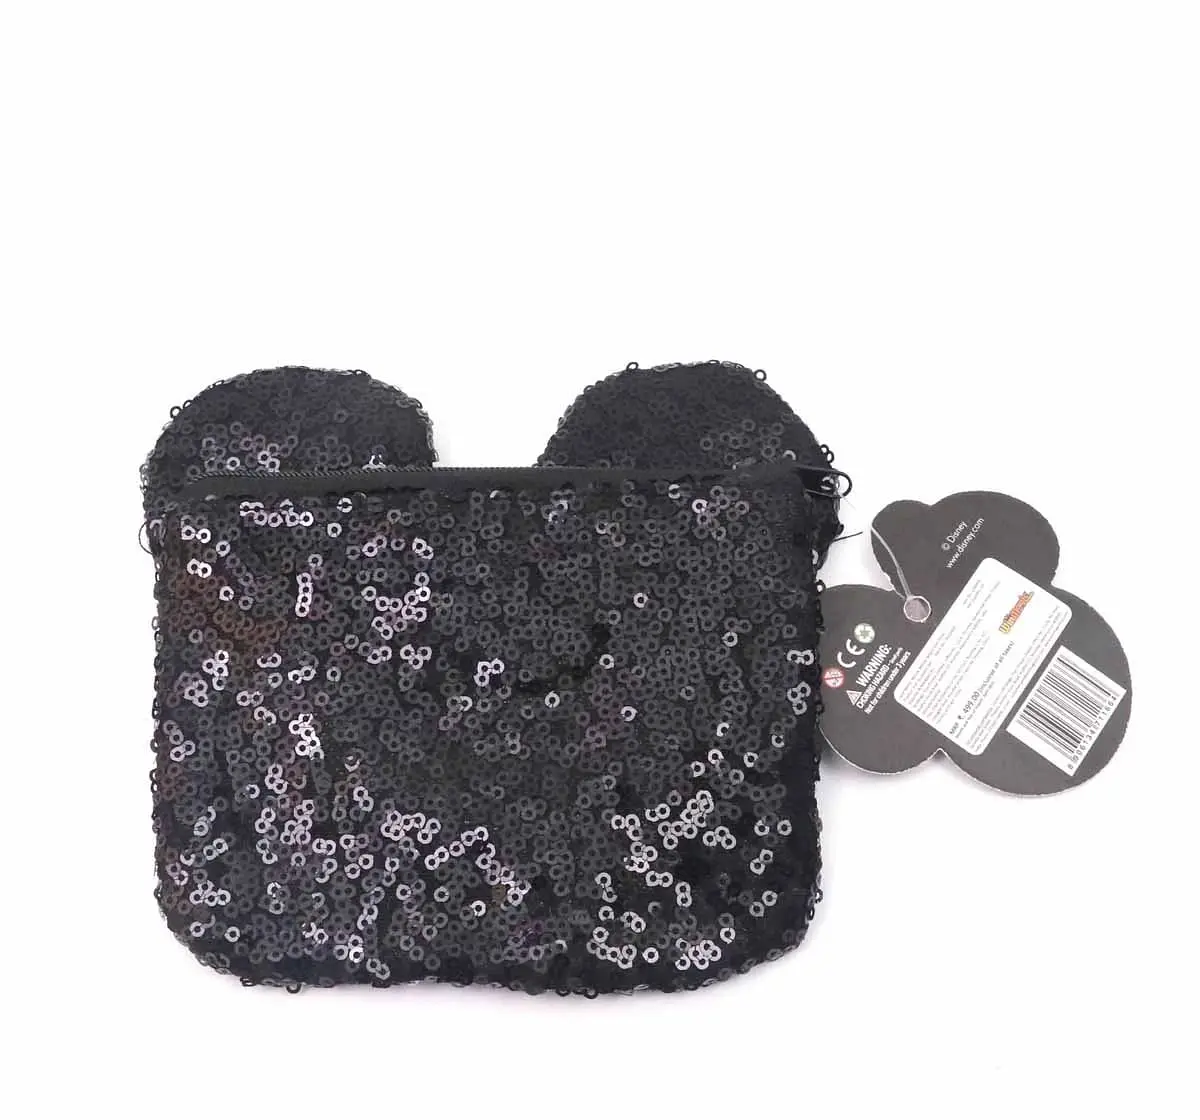 Minnie Mouse Sequin Classy & Stylish by Li'l Diva Pack Of 2 Purse For Girls 3 Years And Above, Black & Red